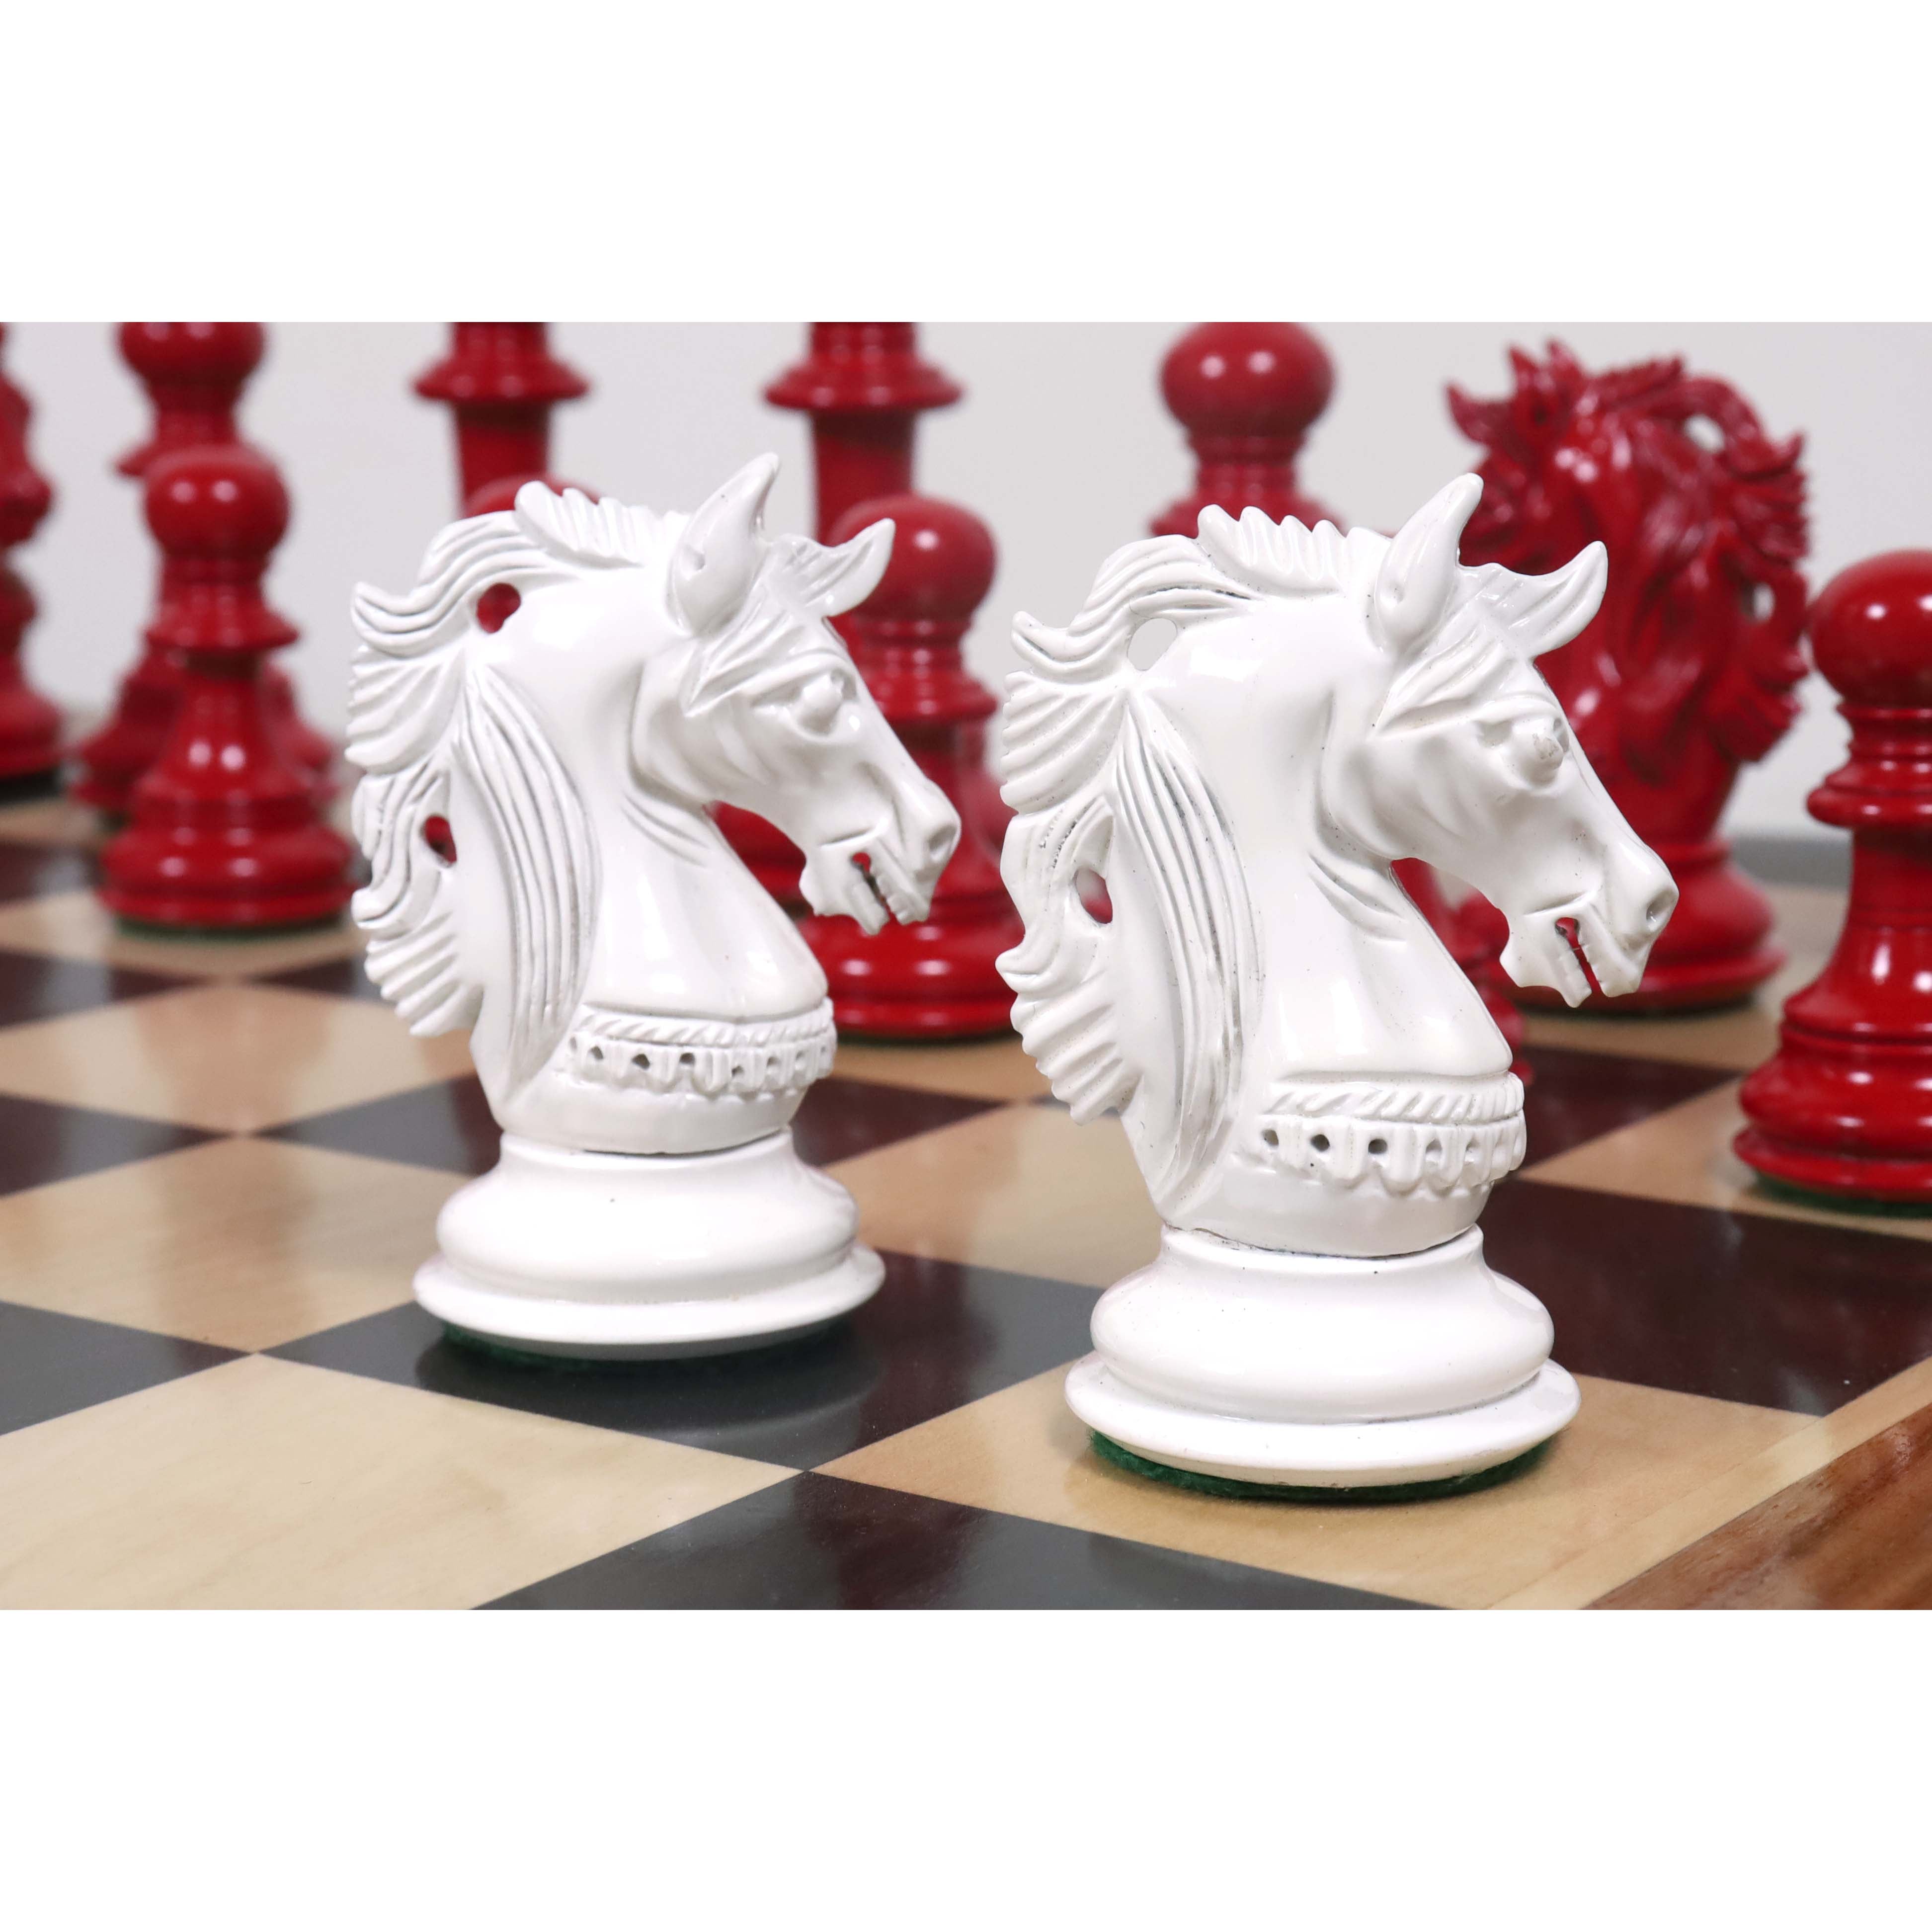 CLEARANCE - The Collector Series Prestige Luxury Chess Pieces